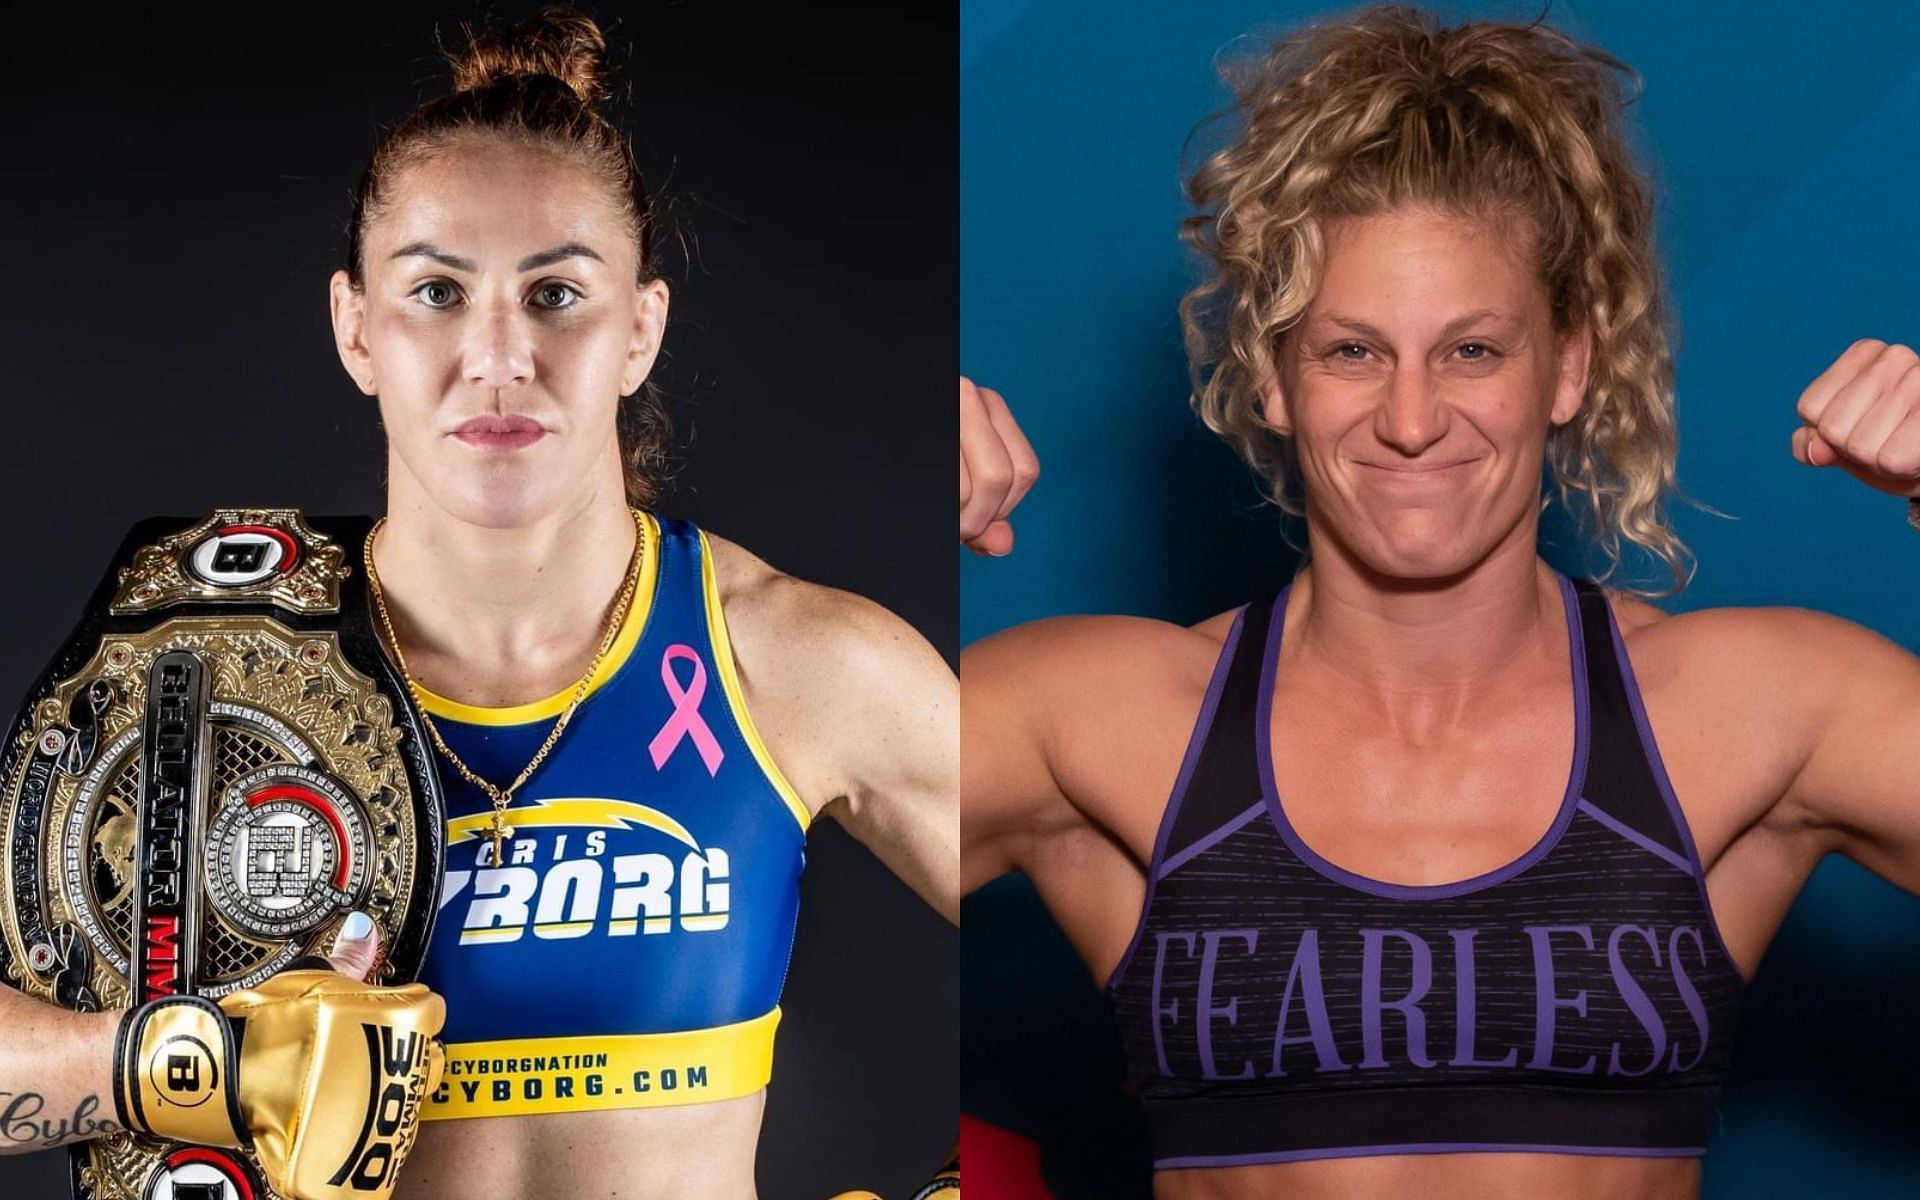 Cris Cyborg [Left] and Kayla Harrison [Right] are reportedly not competing at the PFL vs. Bellator event [Image courtesy: @criscyborg and @KaylaH - X]